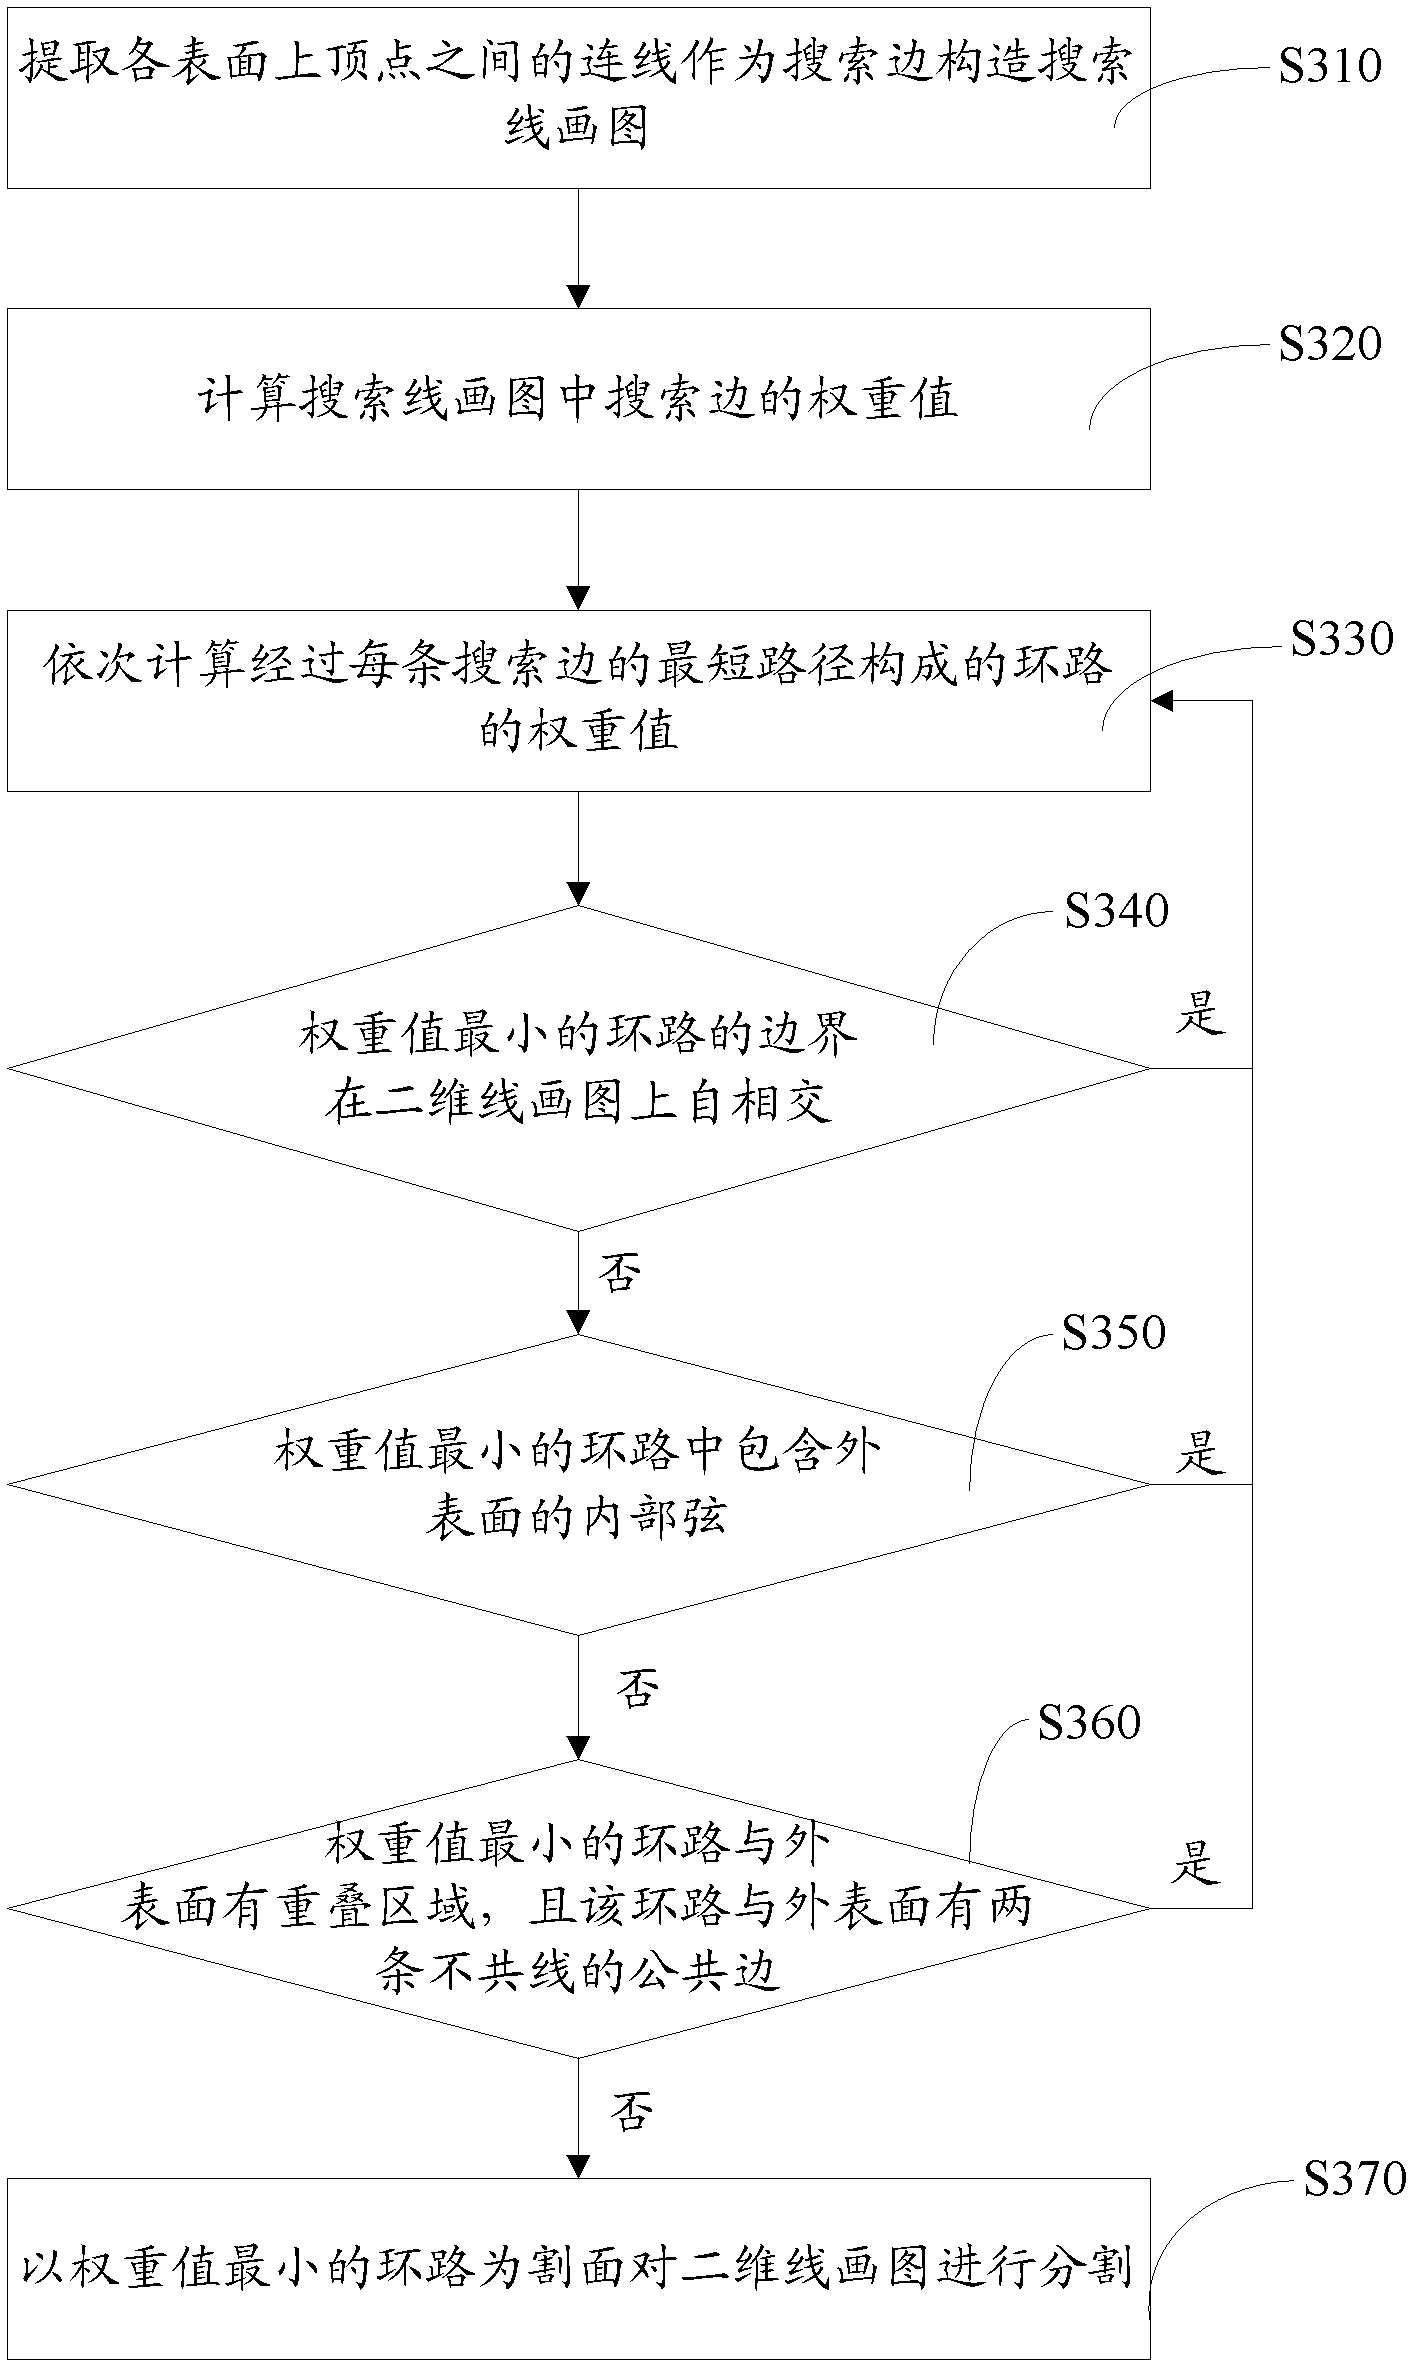 Computer-assisted design system and method for three-dimensional objects